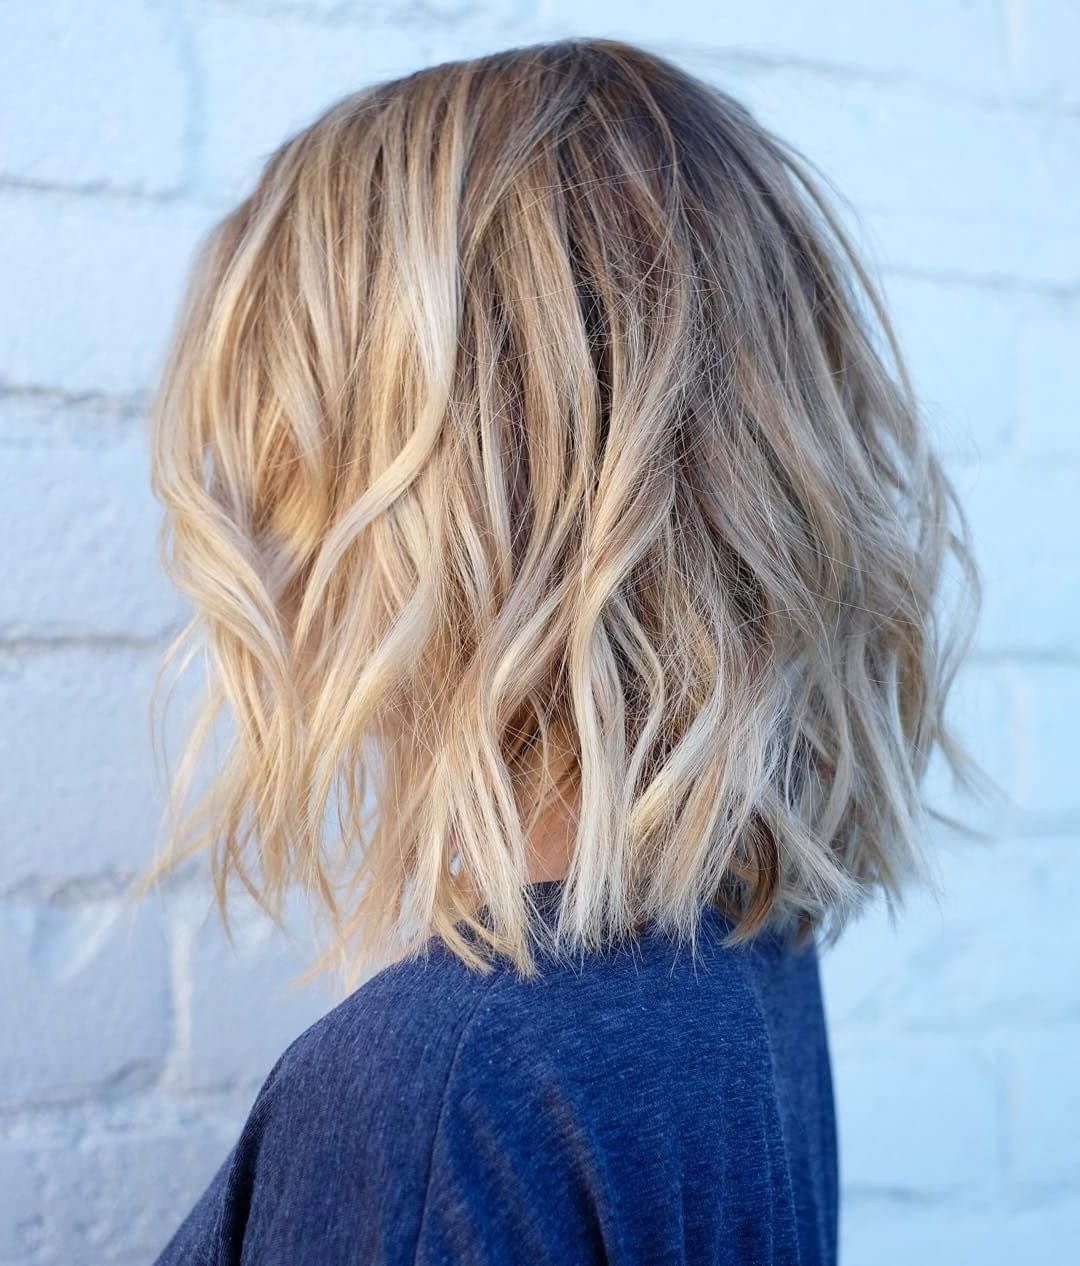 50 Fresh Short Blonde Hair Ideas To Update Your Style In 2018 Within Popular Sleek Ash Blonde Hairstyles (View 15 of 20)